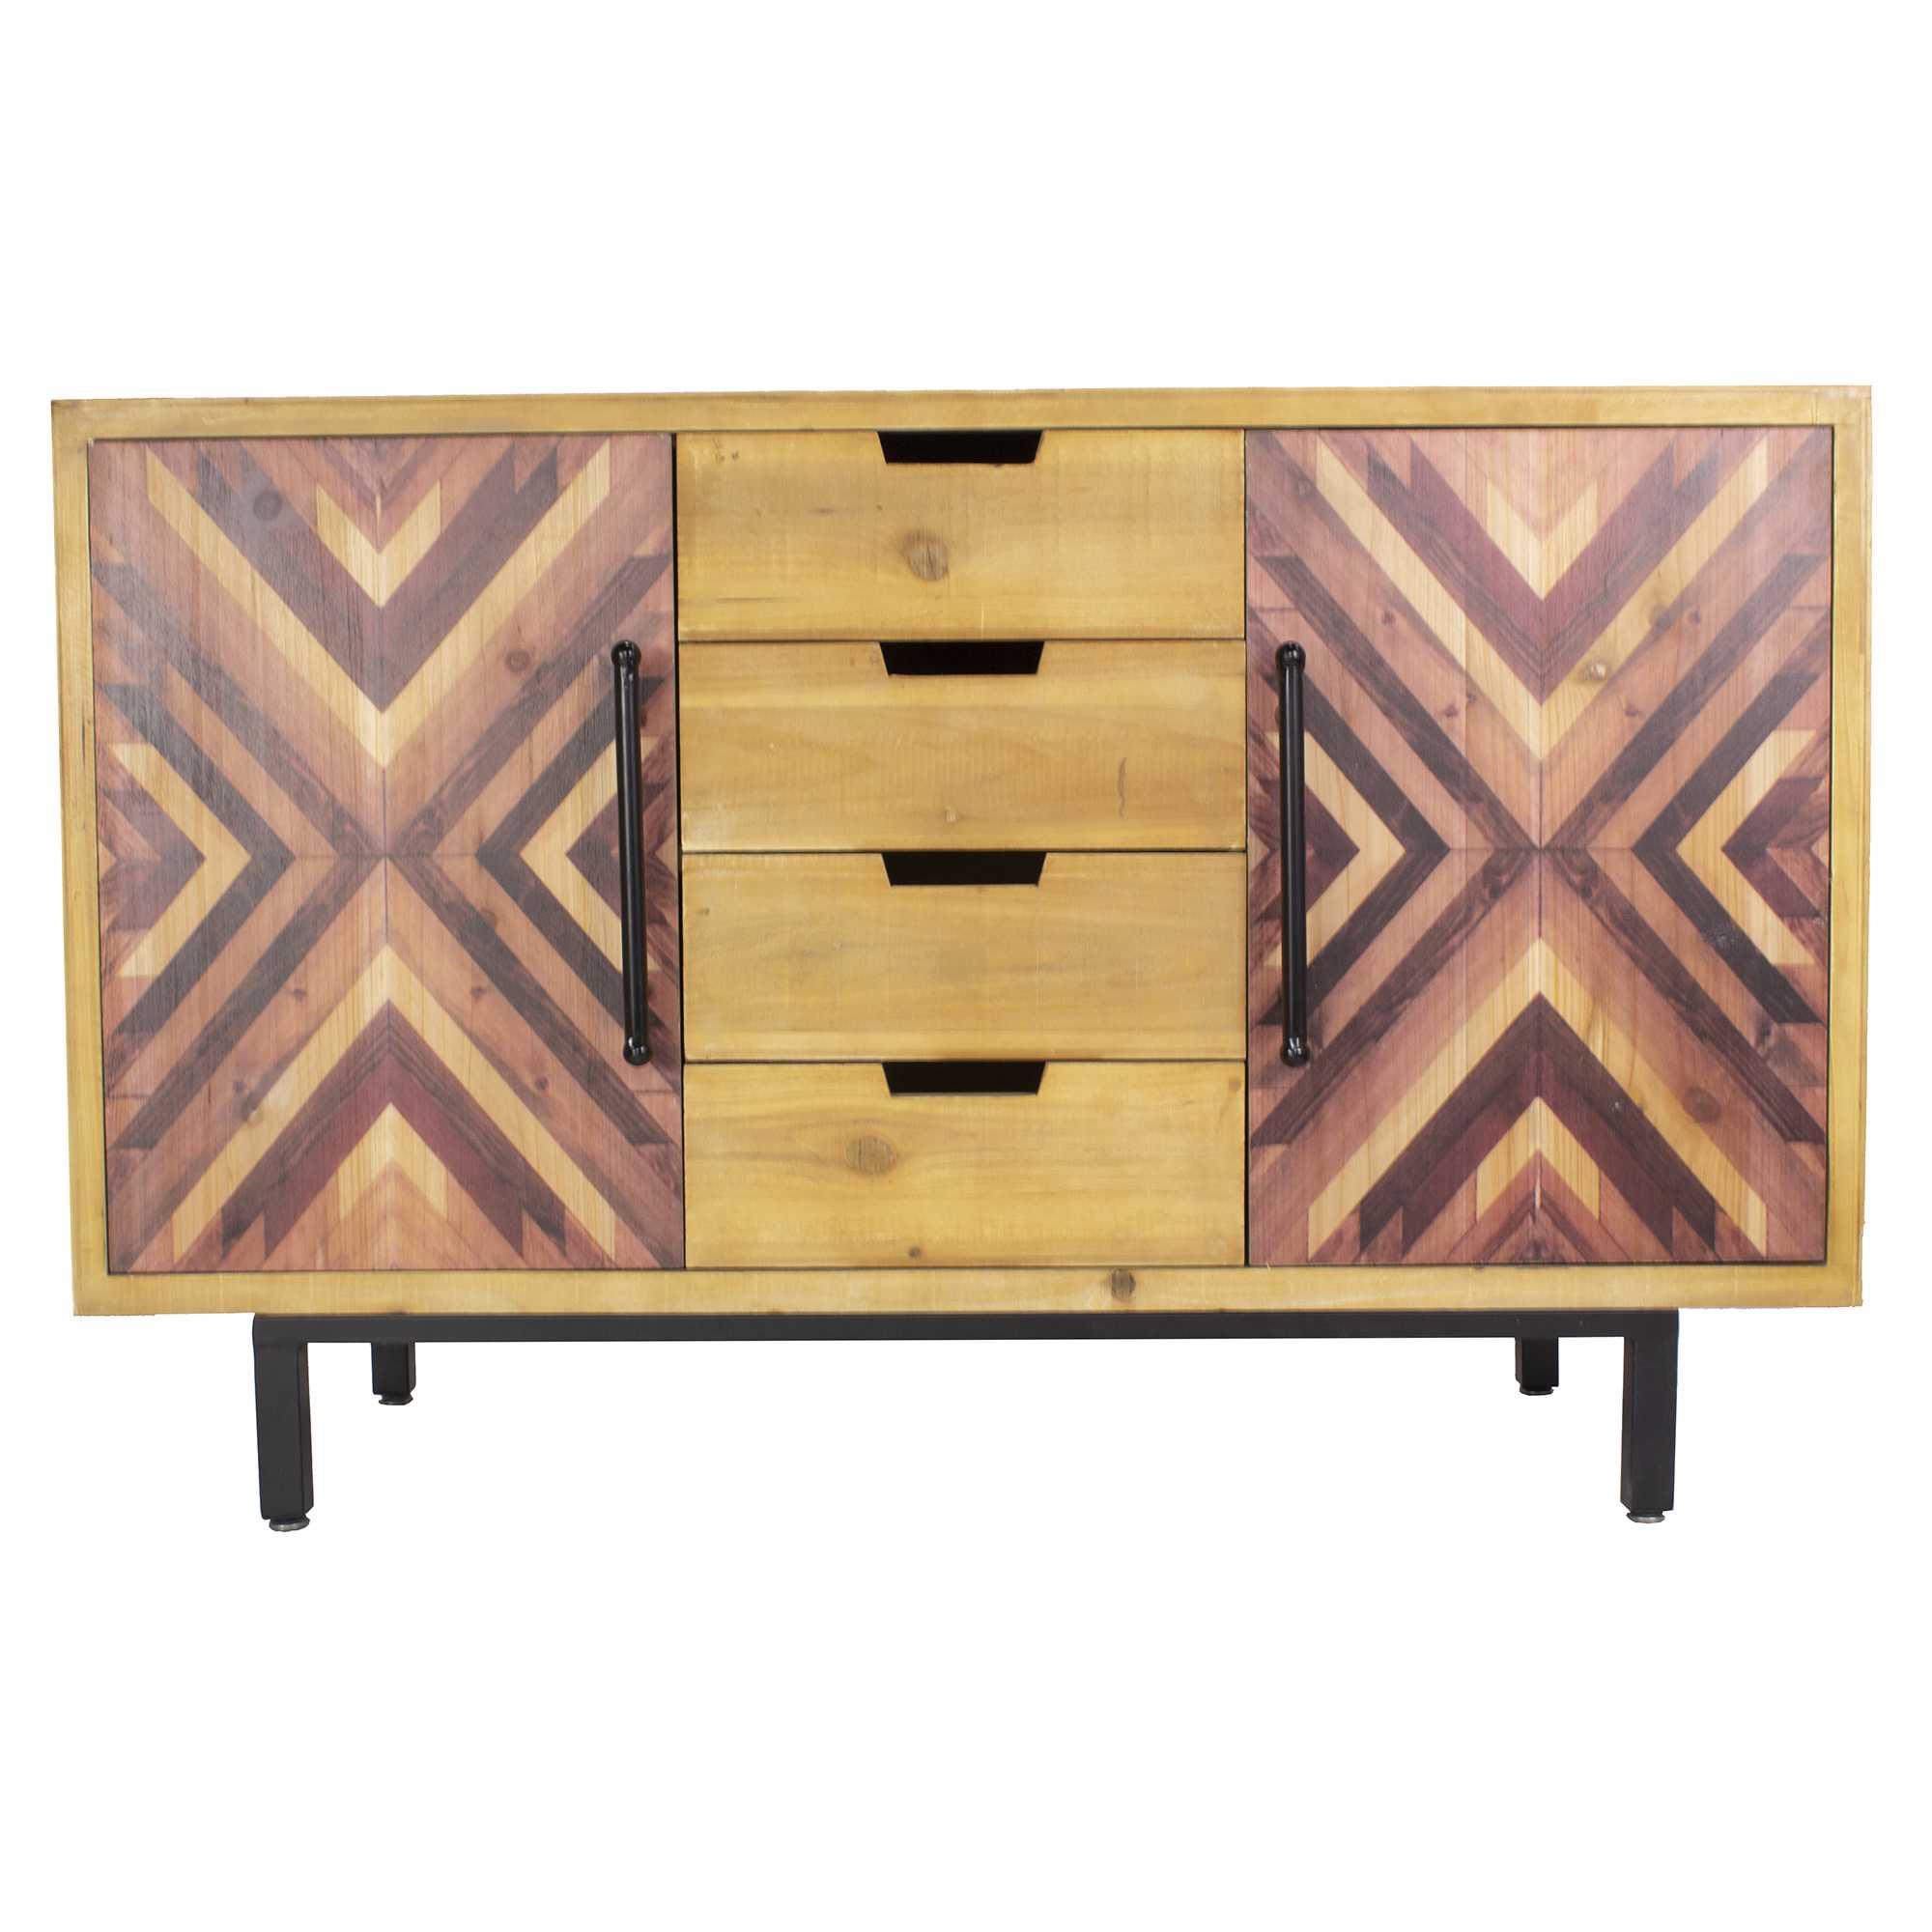 47.25" X 15.75" X 30" Brown MDF Contemporary Wooden Sideboard Cabinet